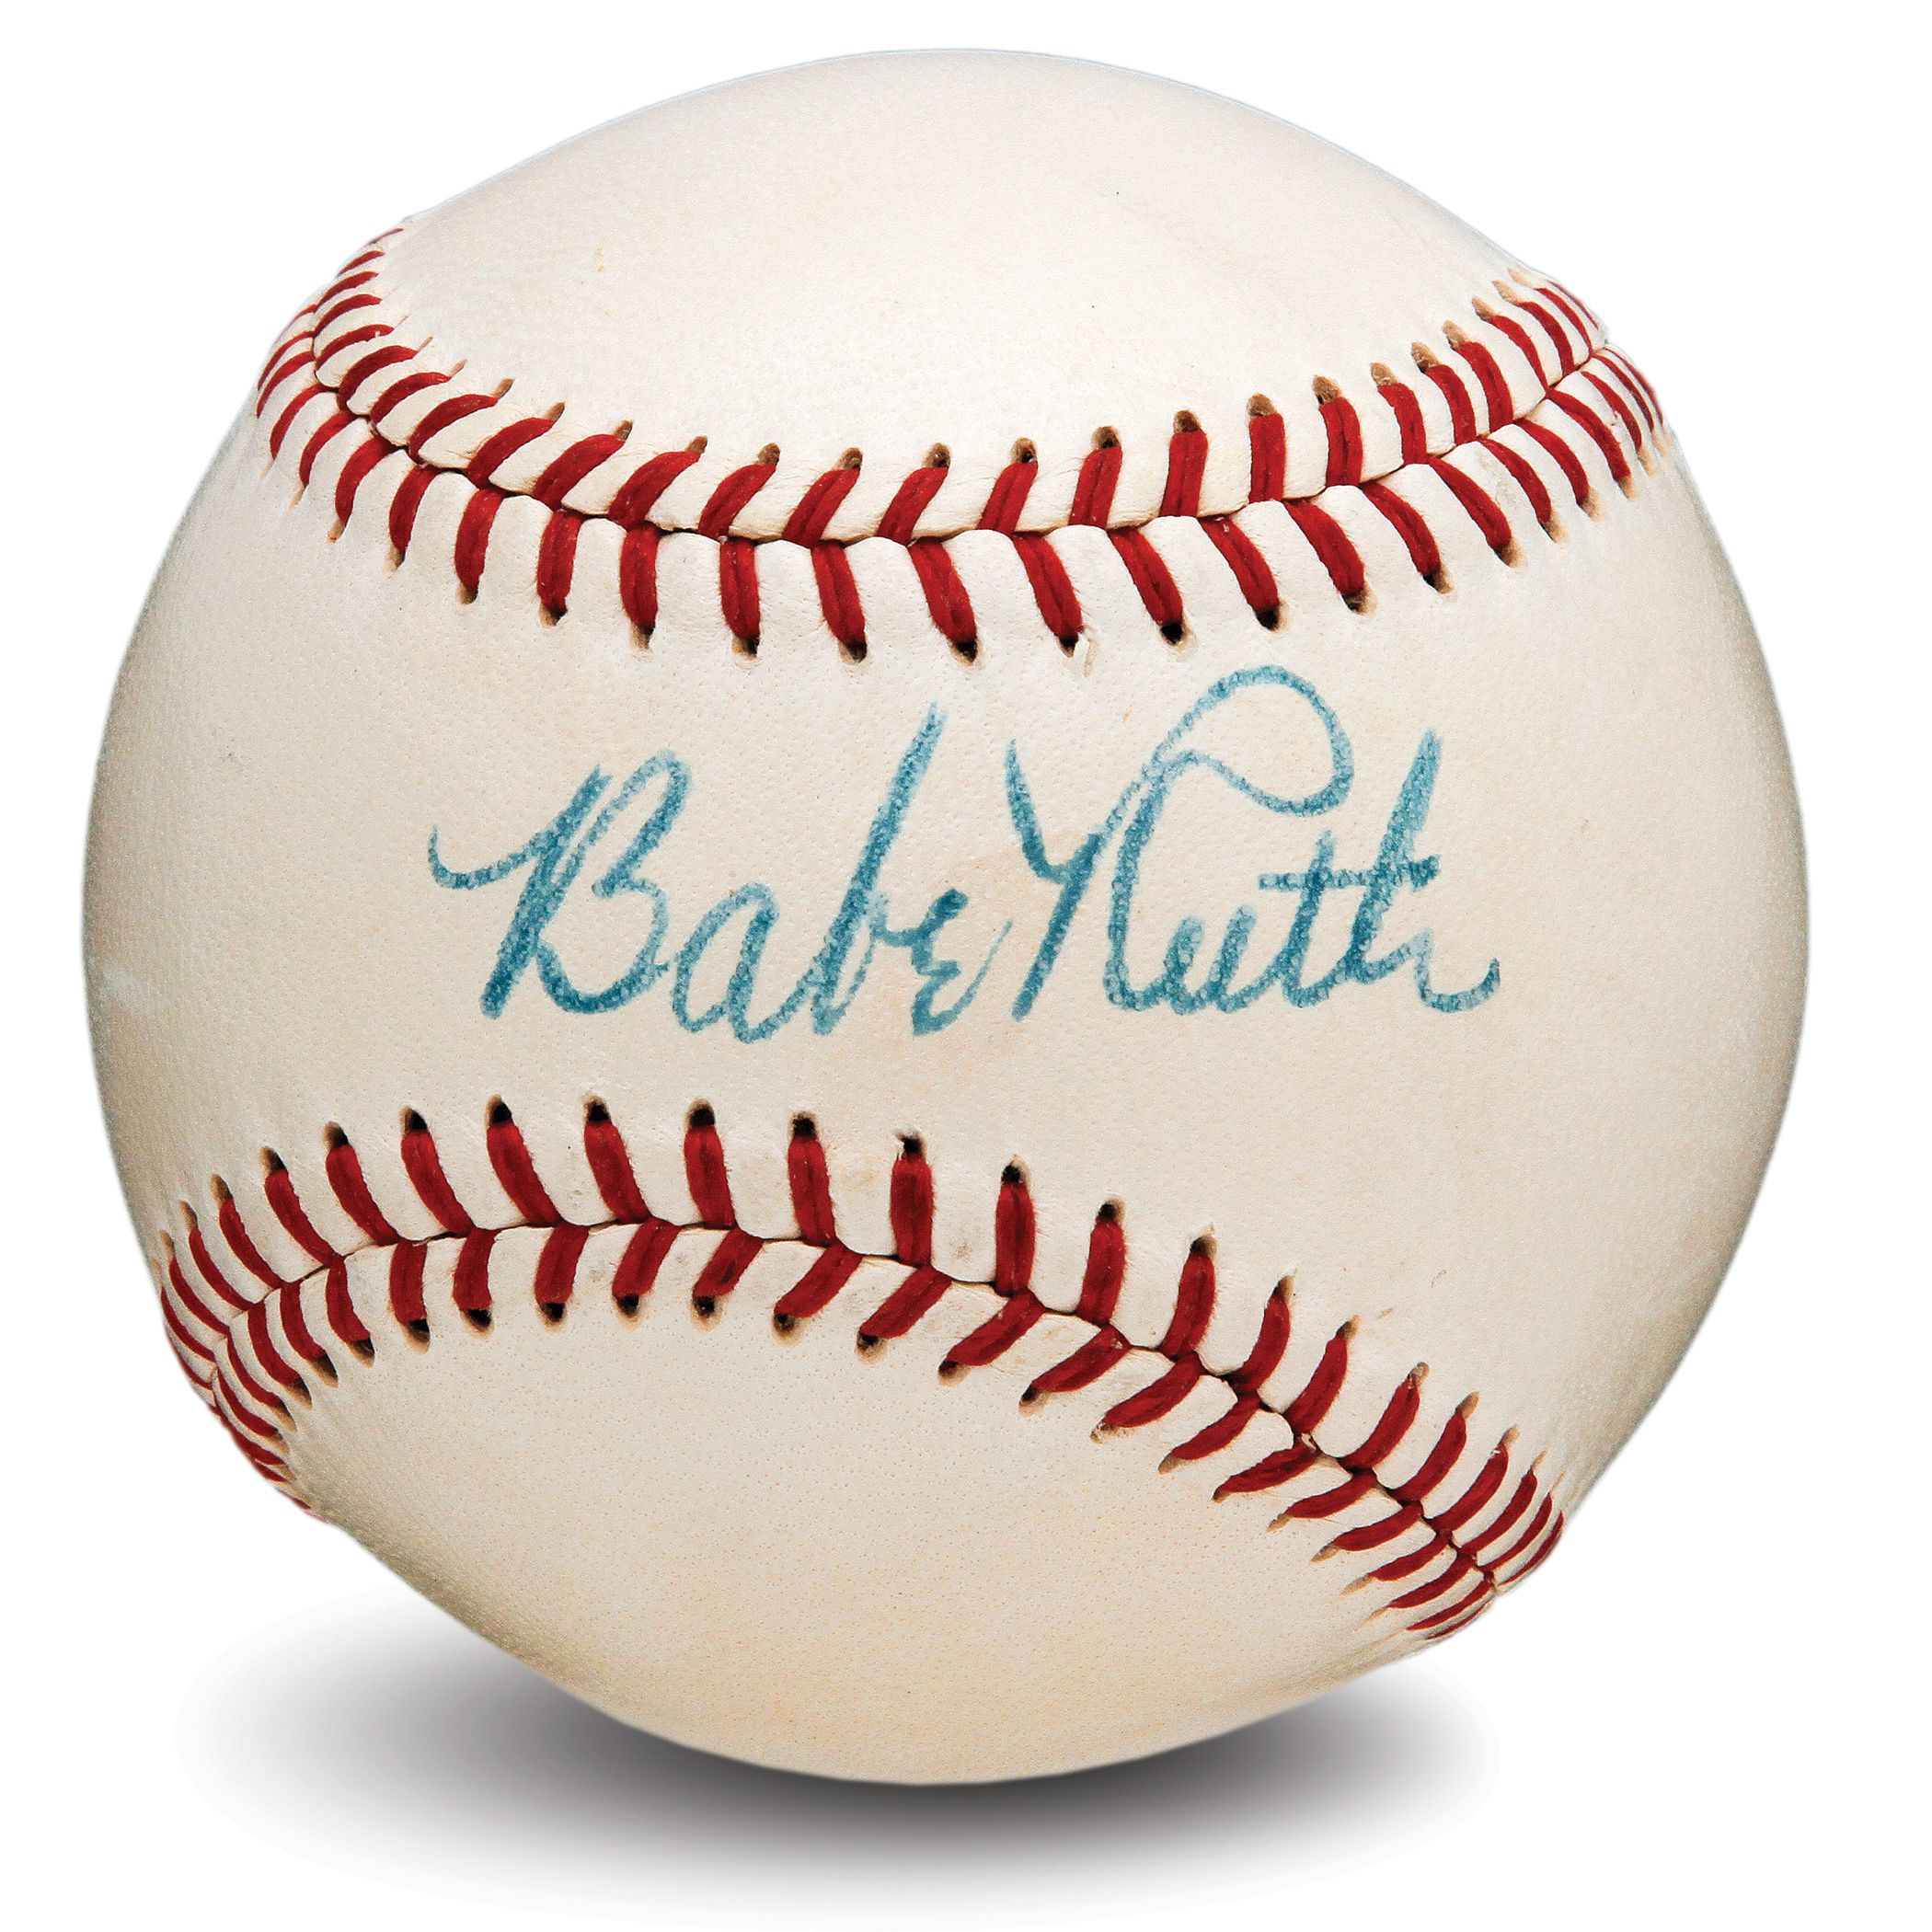 Outstanding Babe Ruth Single-Signed American League Baseball (PSA/DNA 8.5 W...